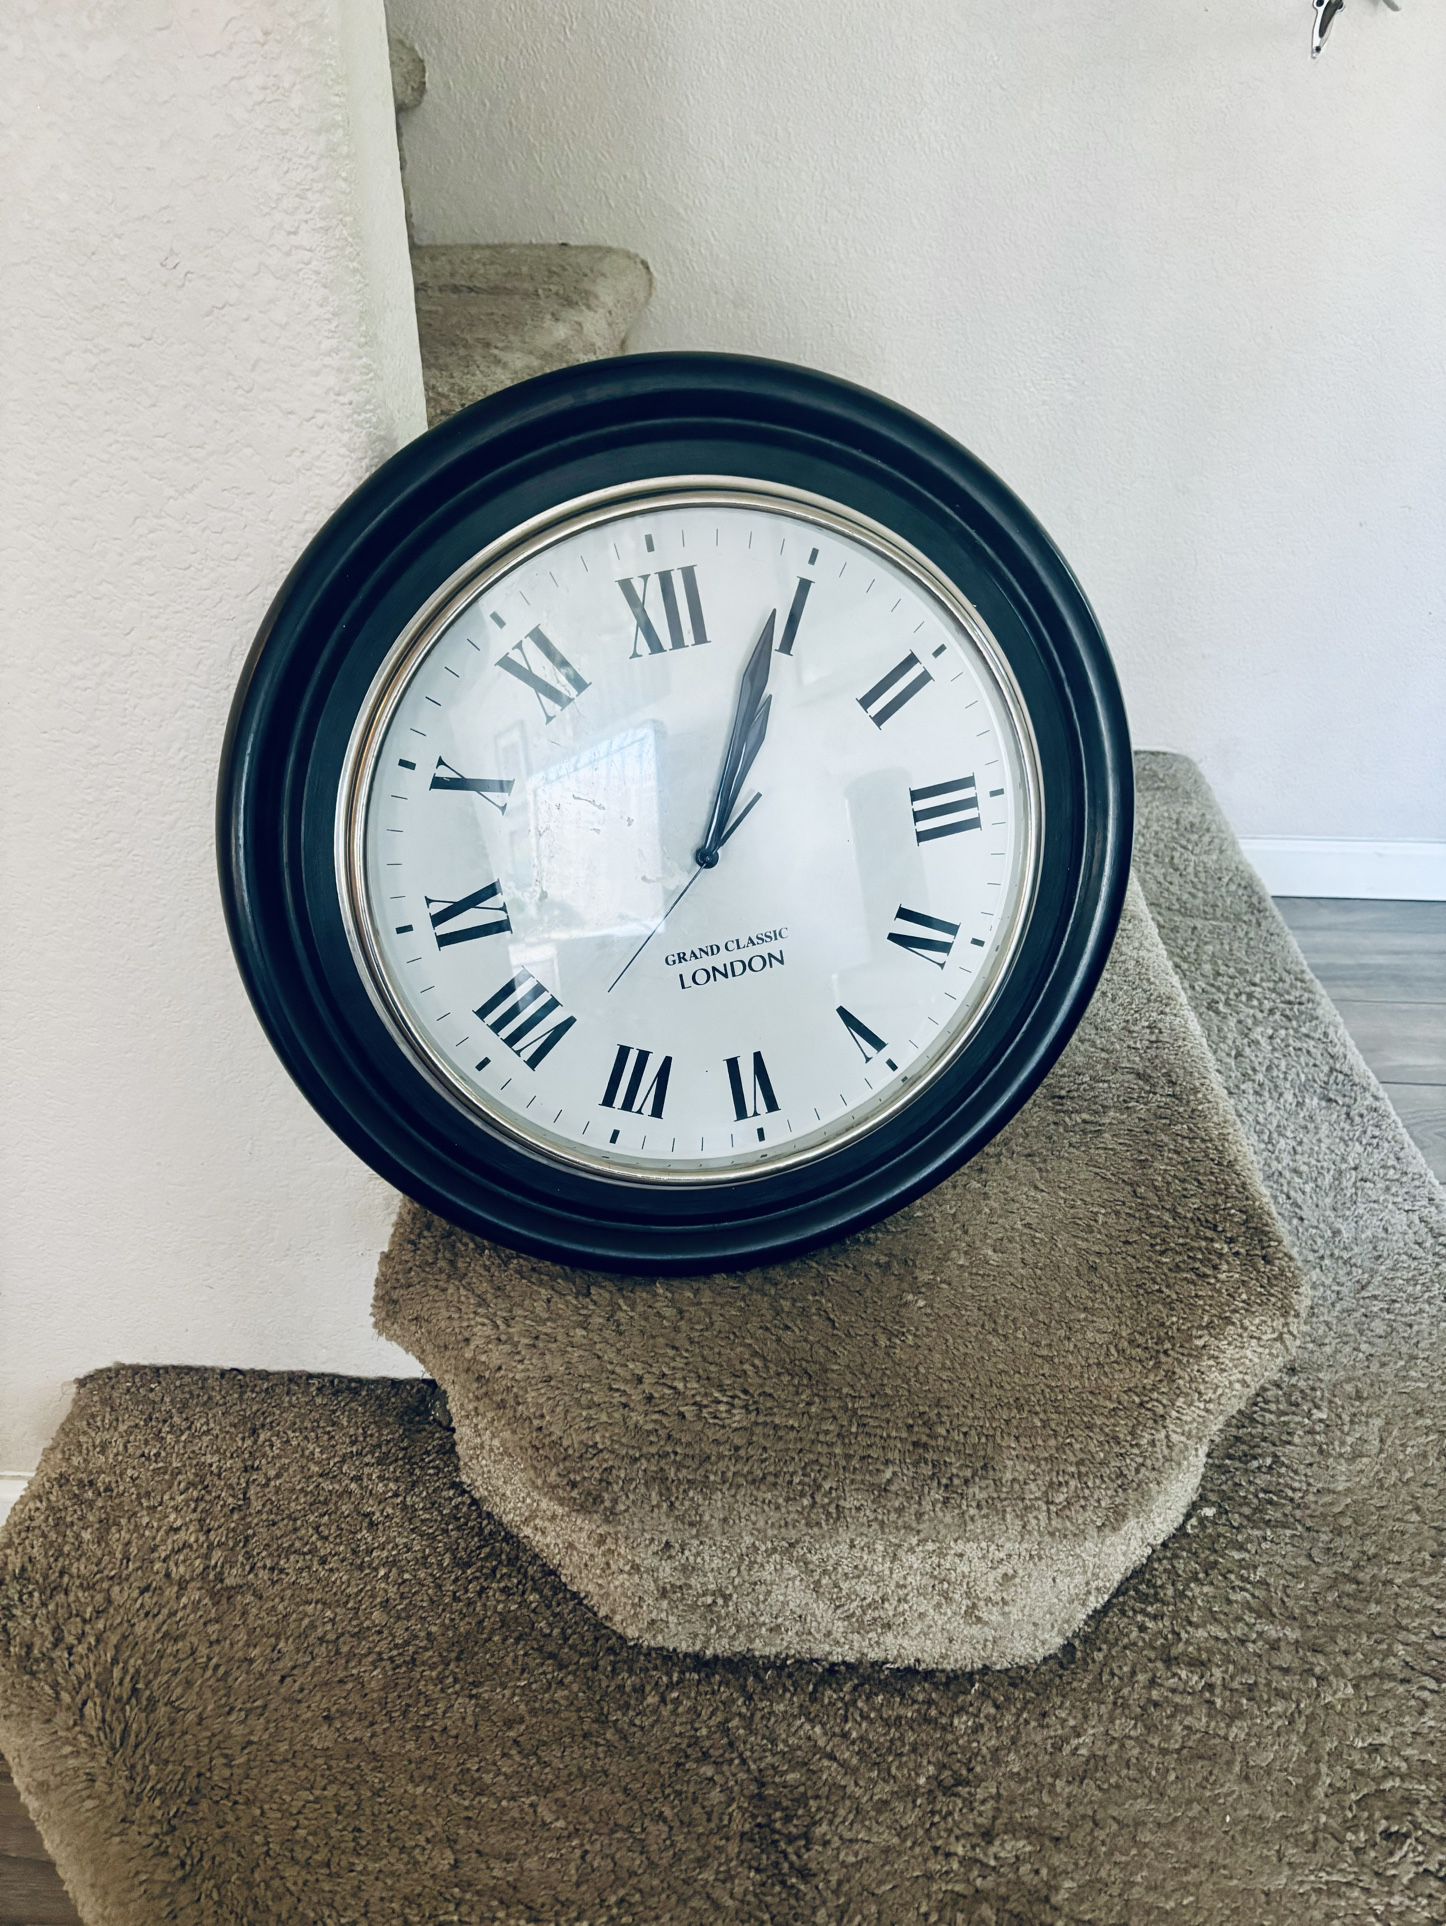 Sturdy Clock From Crate And Barrel. 